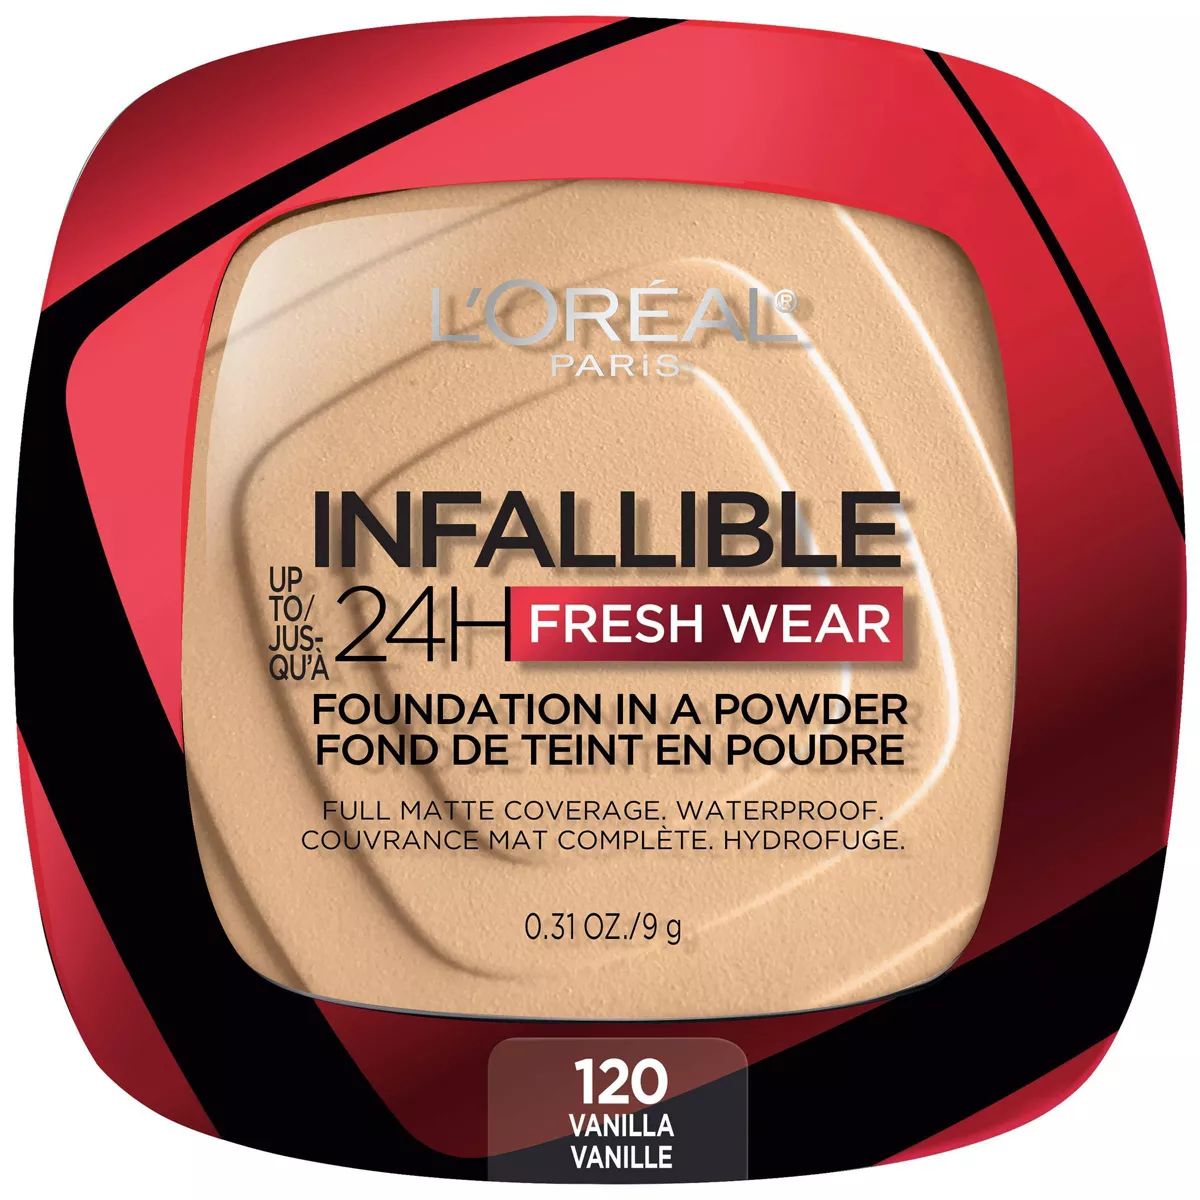 L'Oreal Paris Infallible Up to 24H Fresh Wear Foundation in a Powder - 0.31oz | Target